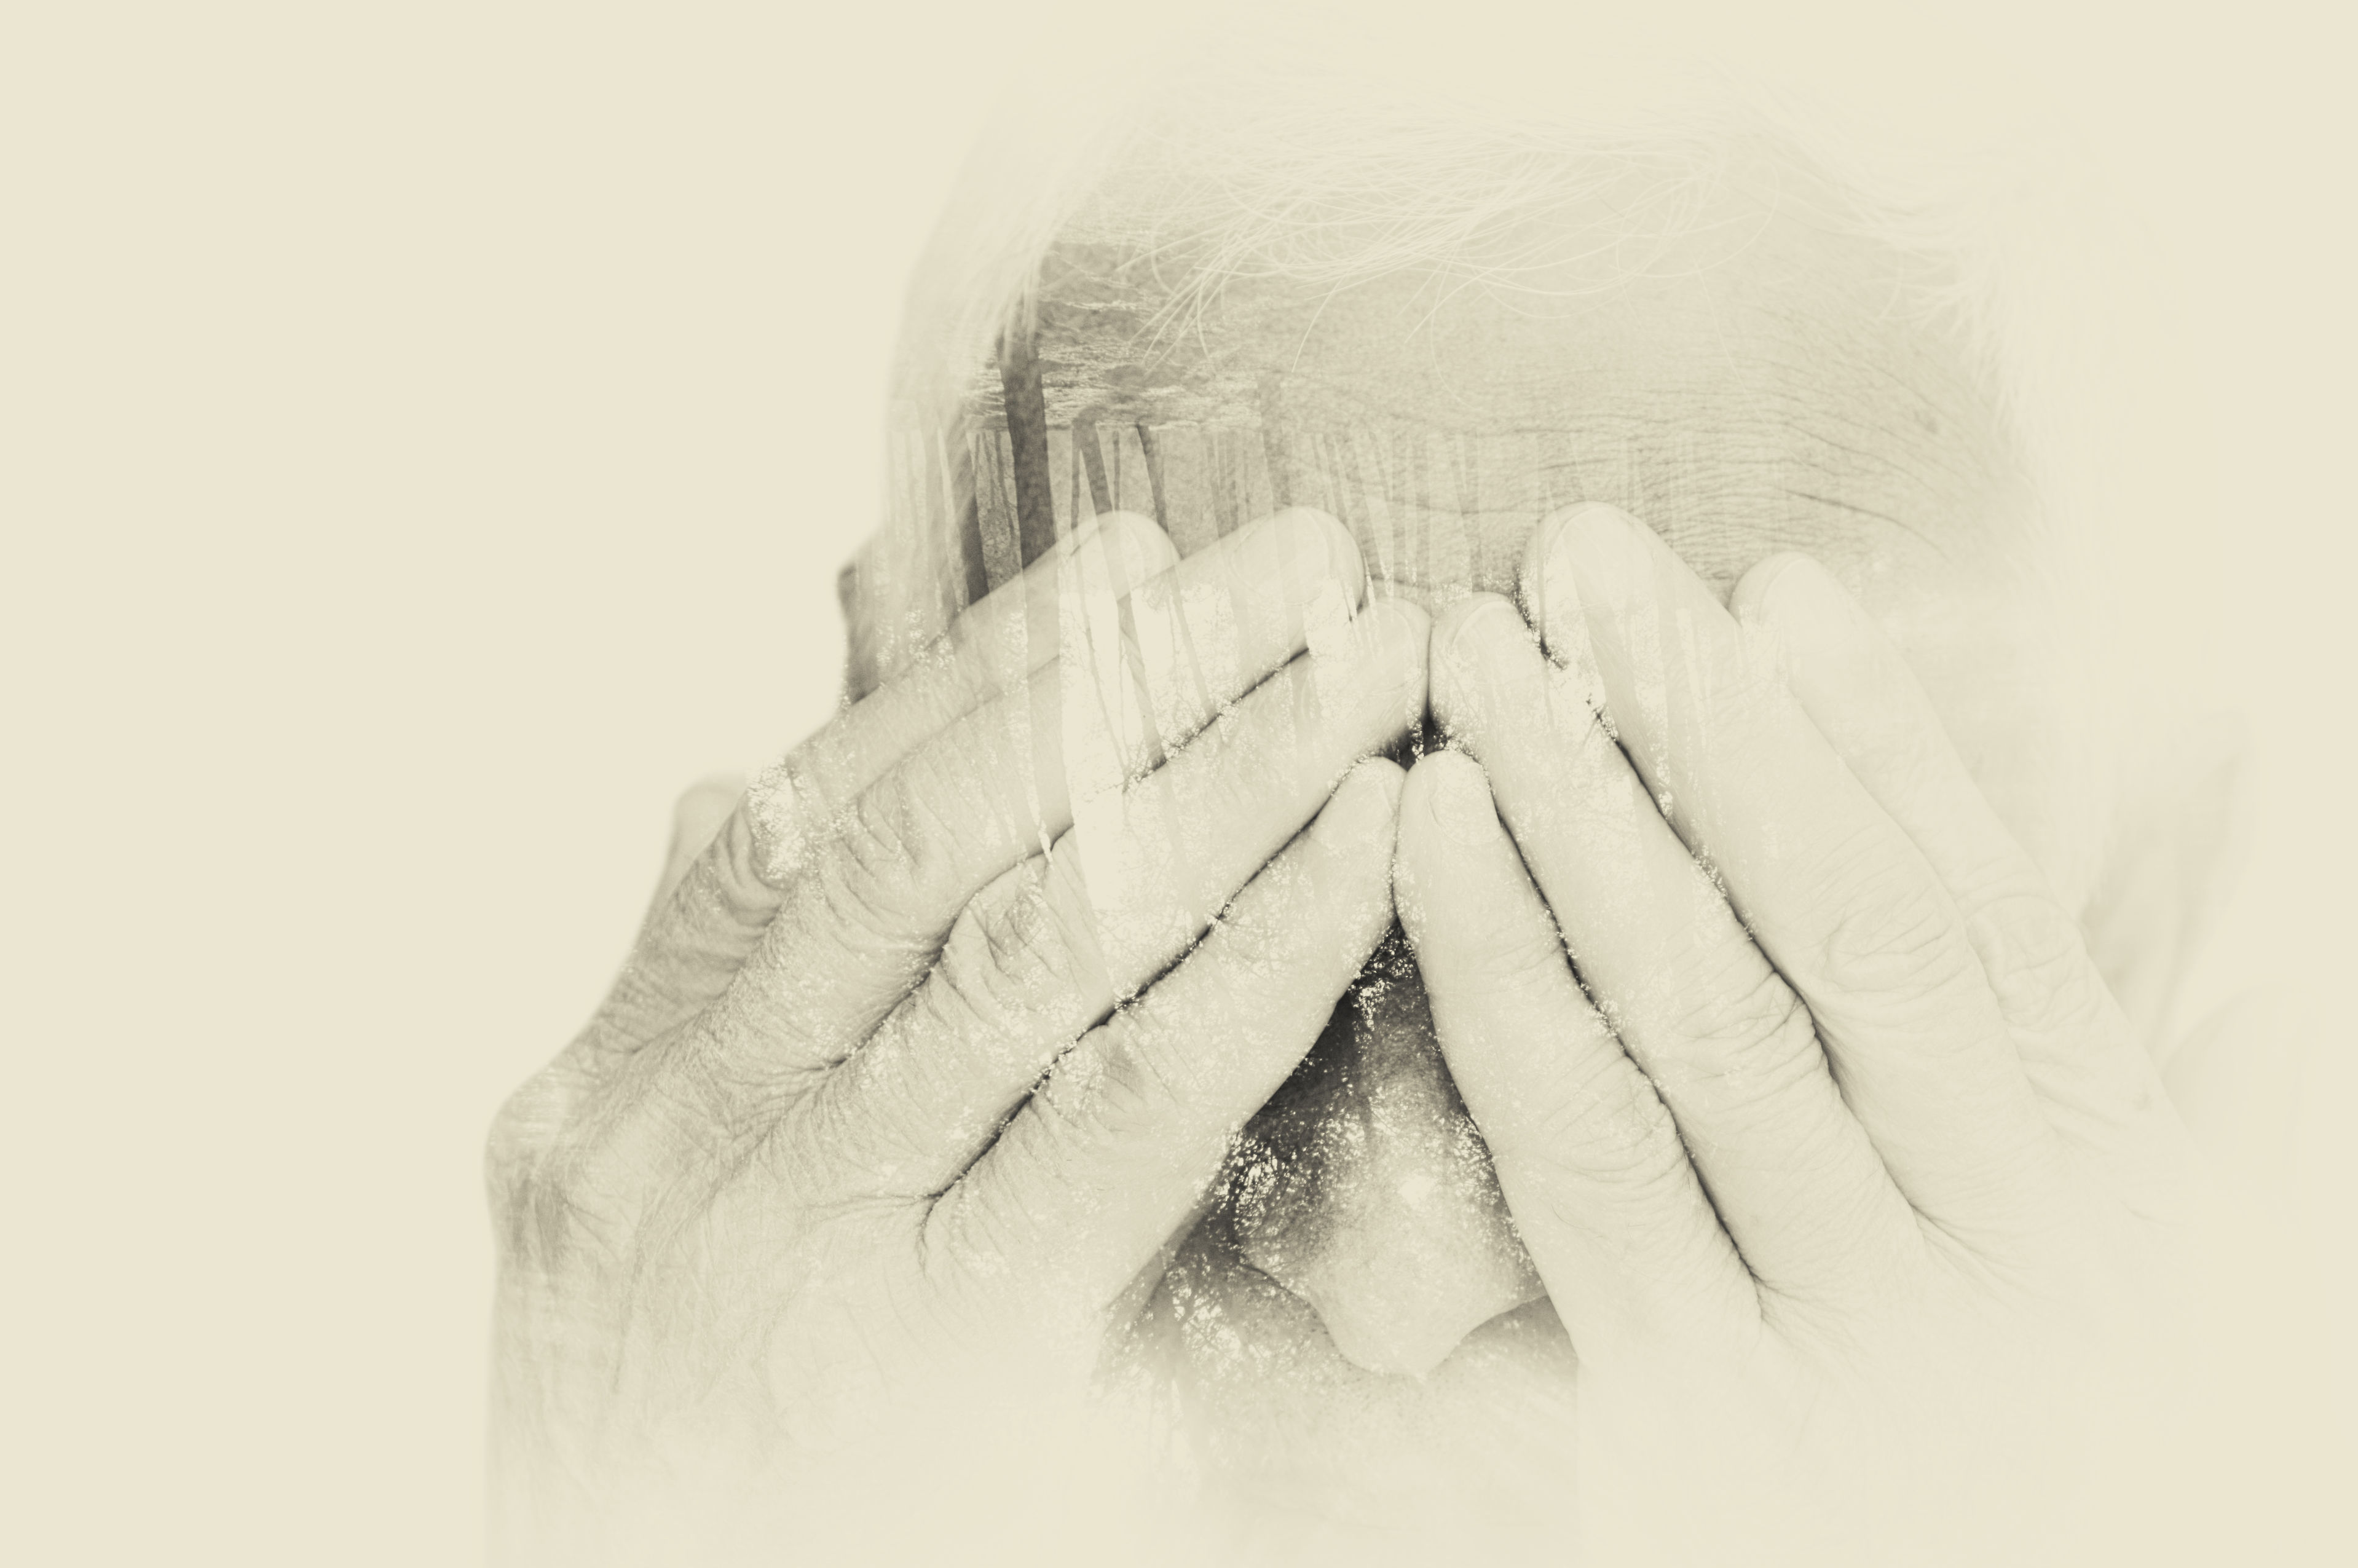 3 Signs of Nursing Home Abuse New Yorkers Should Look For